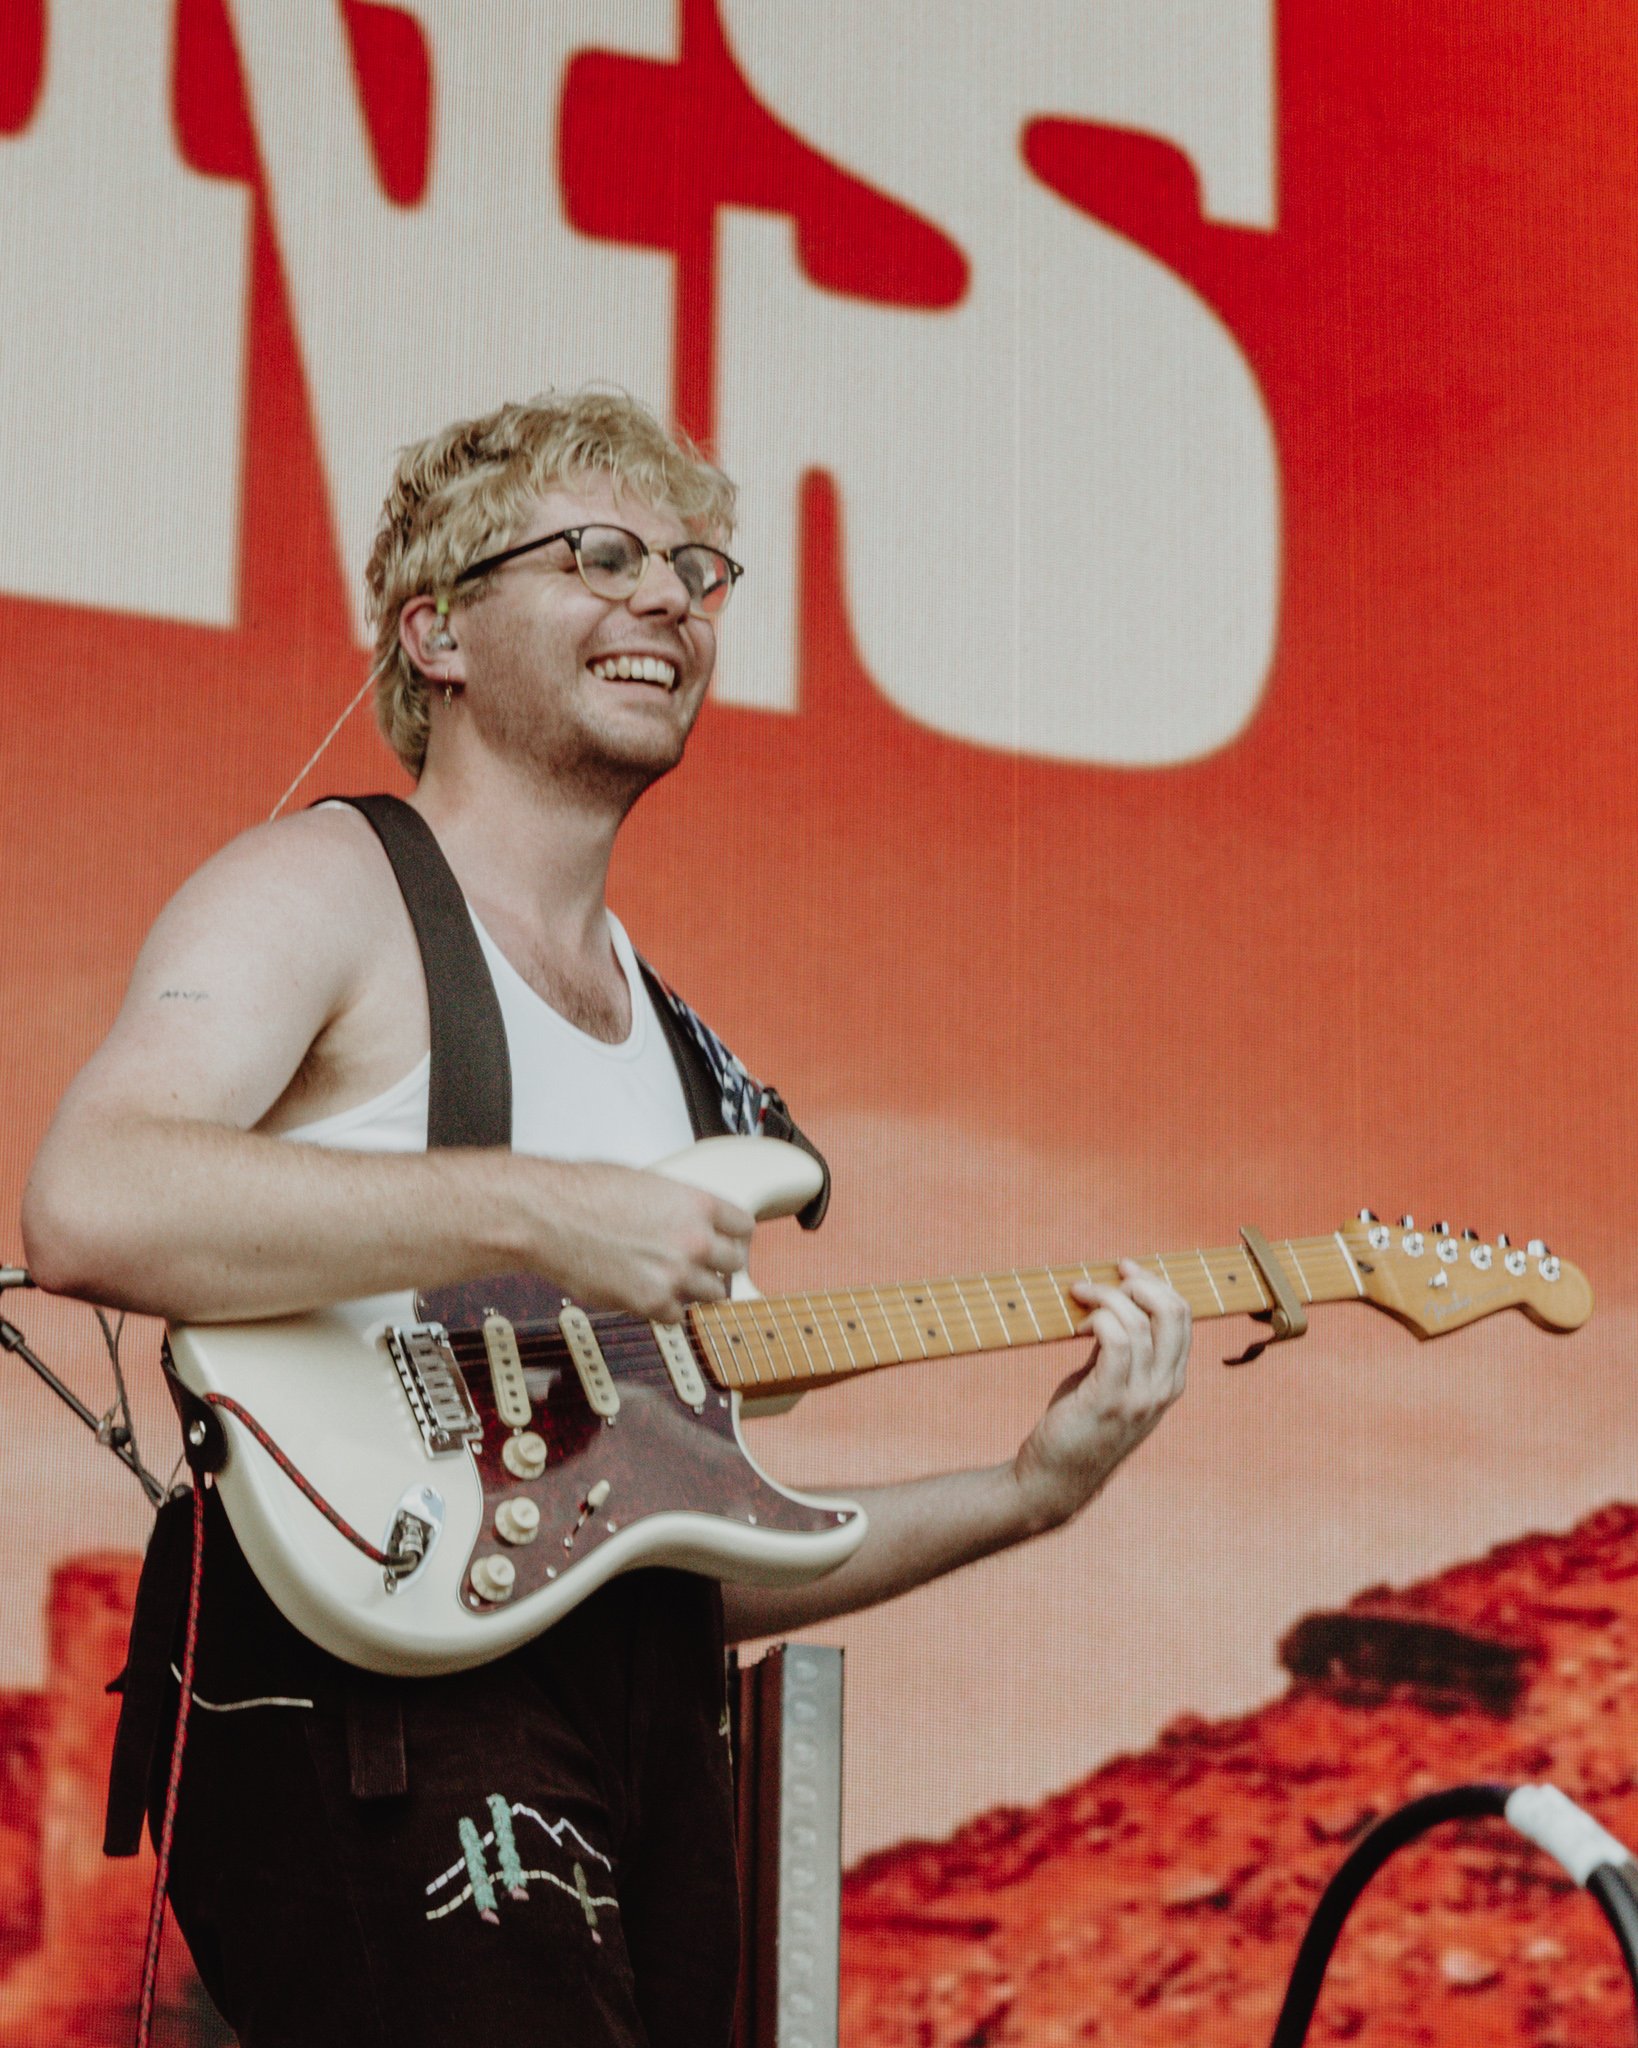  Australian indie-rock band Vacations opens up the first day back at ACL Festival. 